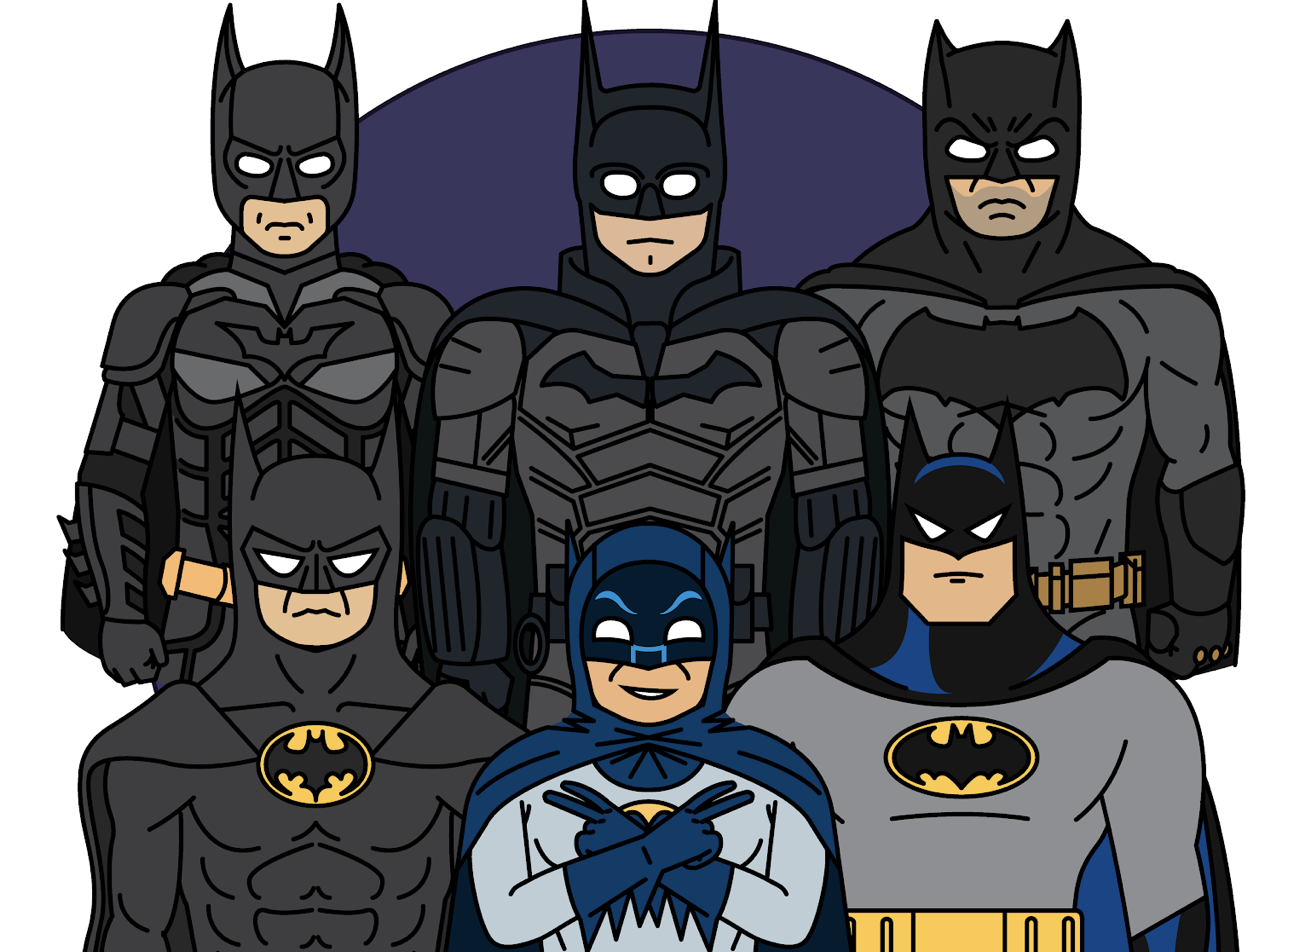 The+theatrically+released+Bat-cluster+of+Batmen%21++